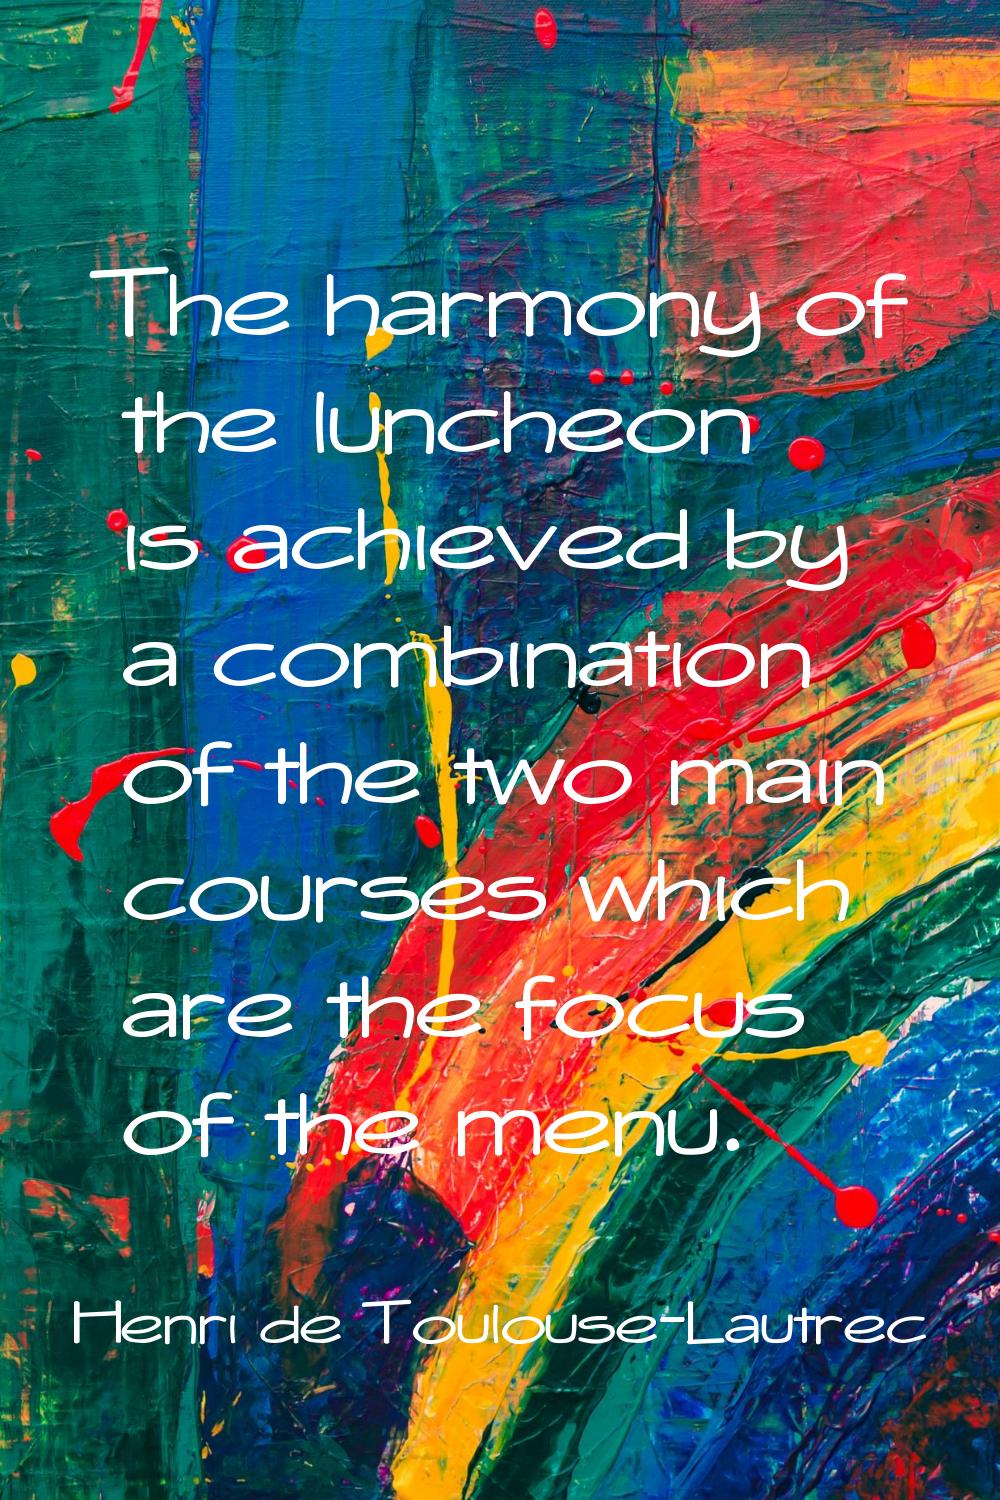 The harmony of the luncheon is achieved by a combination of the two main courses which are the focu